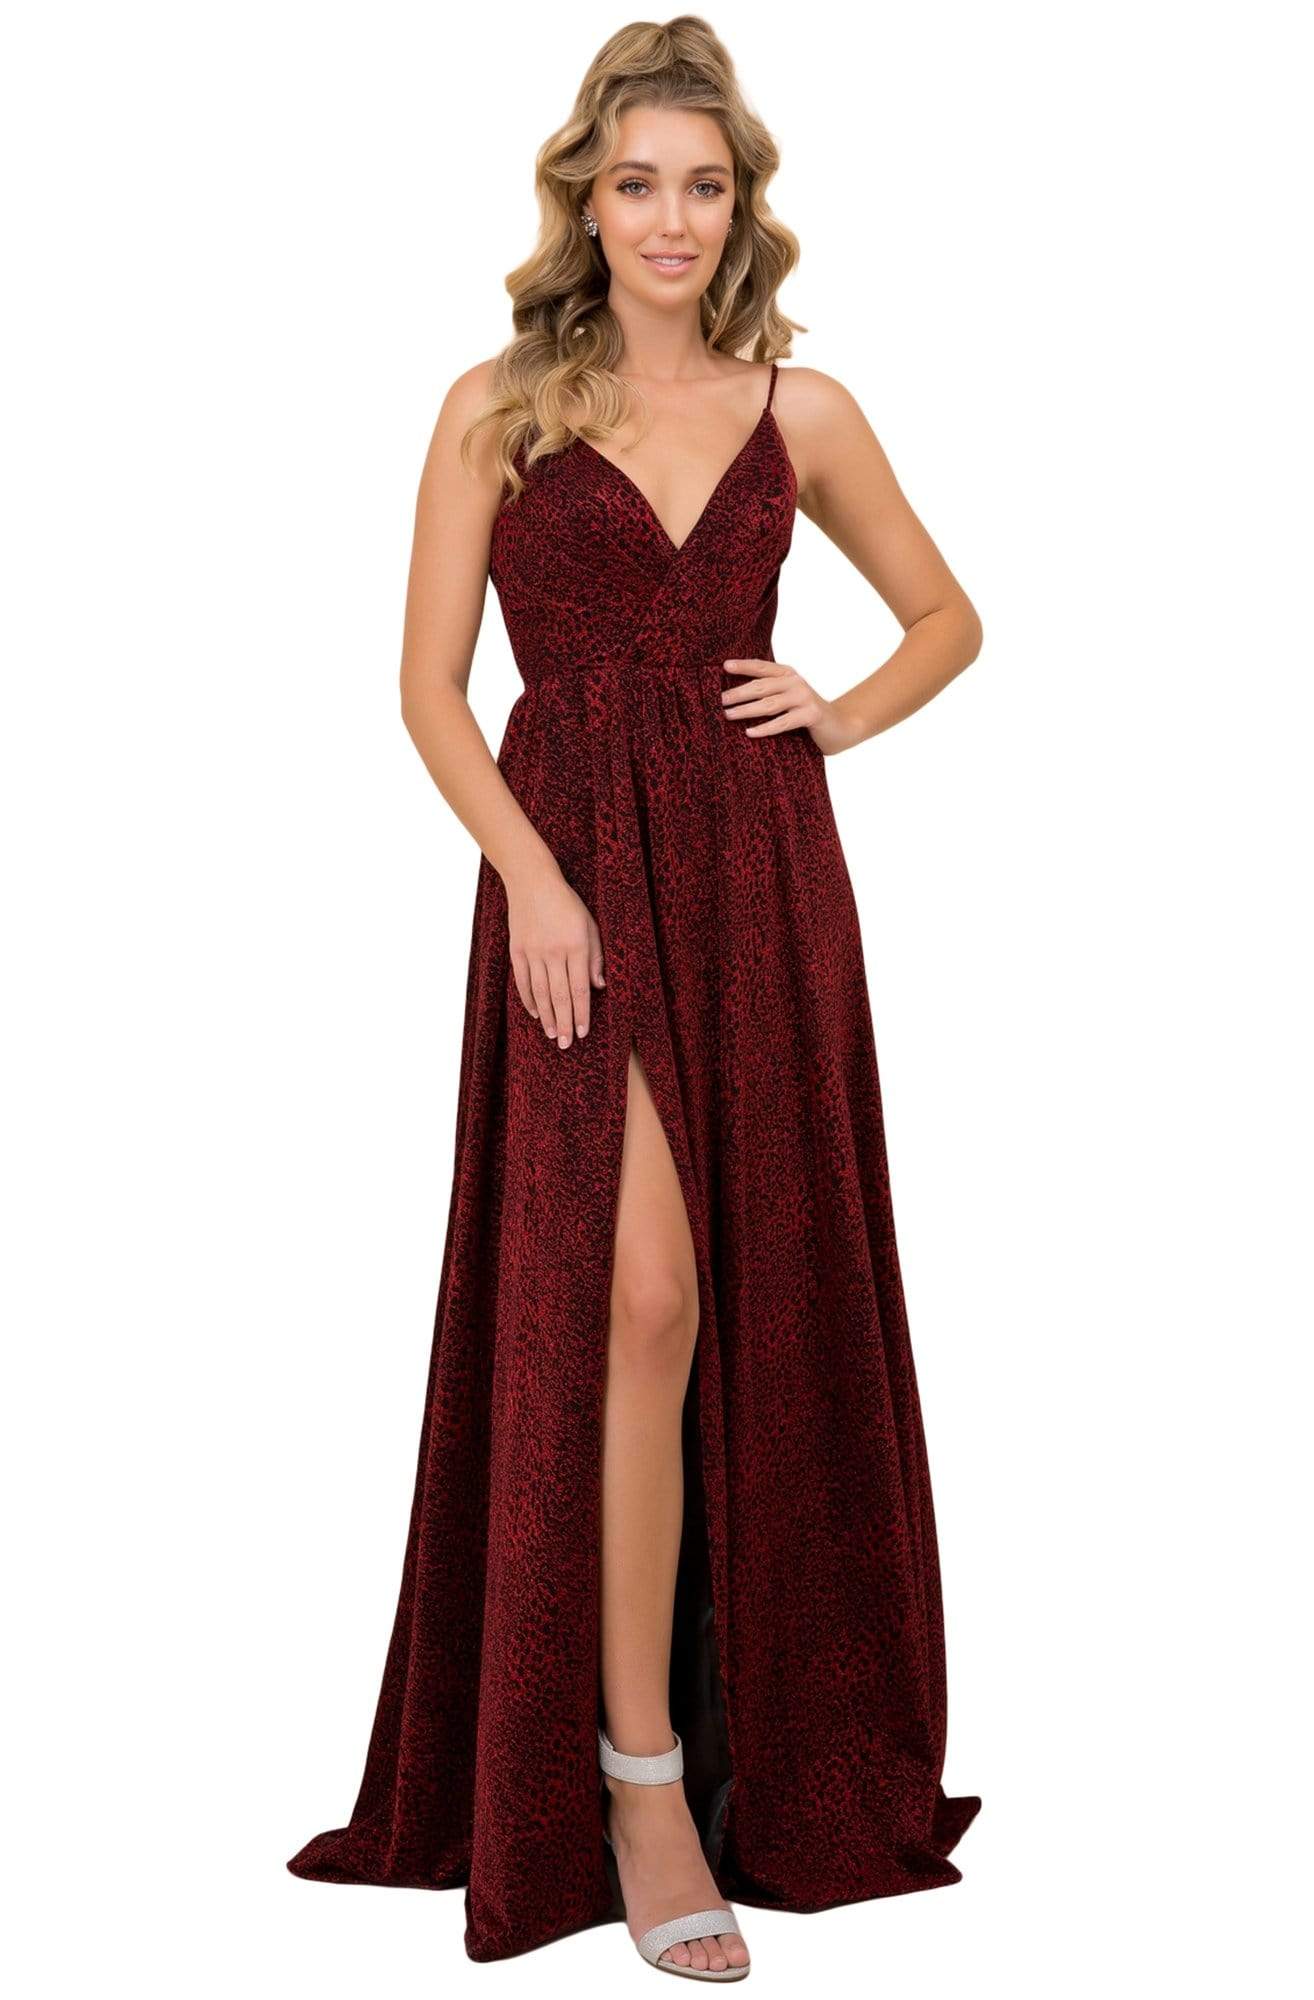 Image of Nox Anabel - R356 V Neck Animal Printed High Slit A-Line Evening Gown